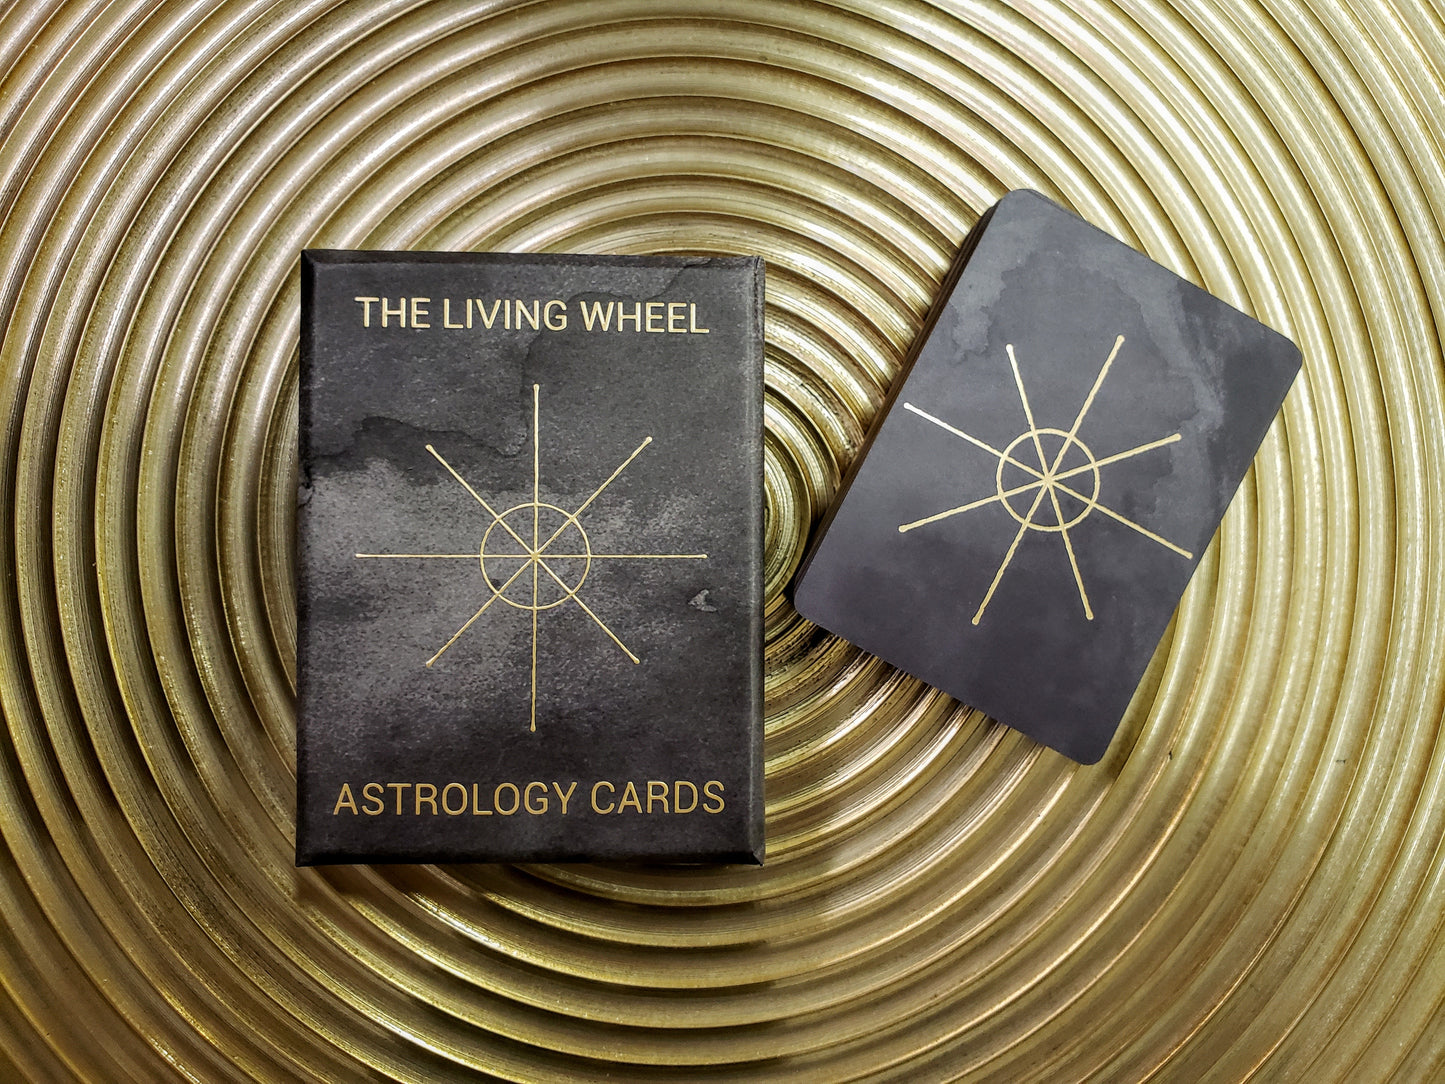 The Living Wheel Astrology Cards